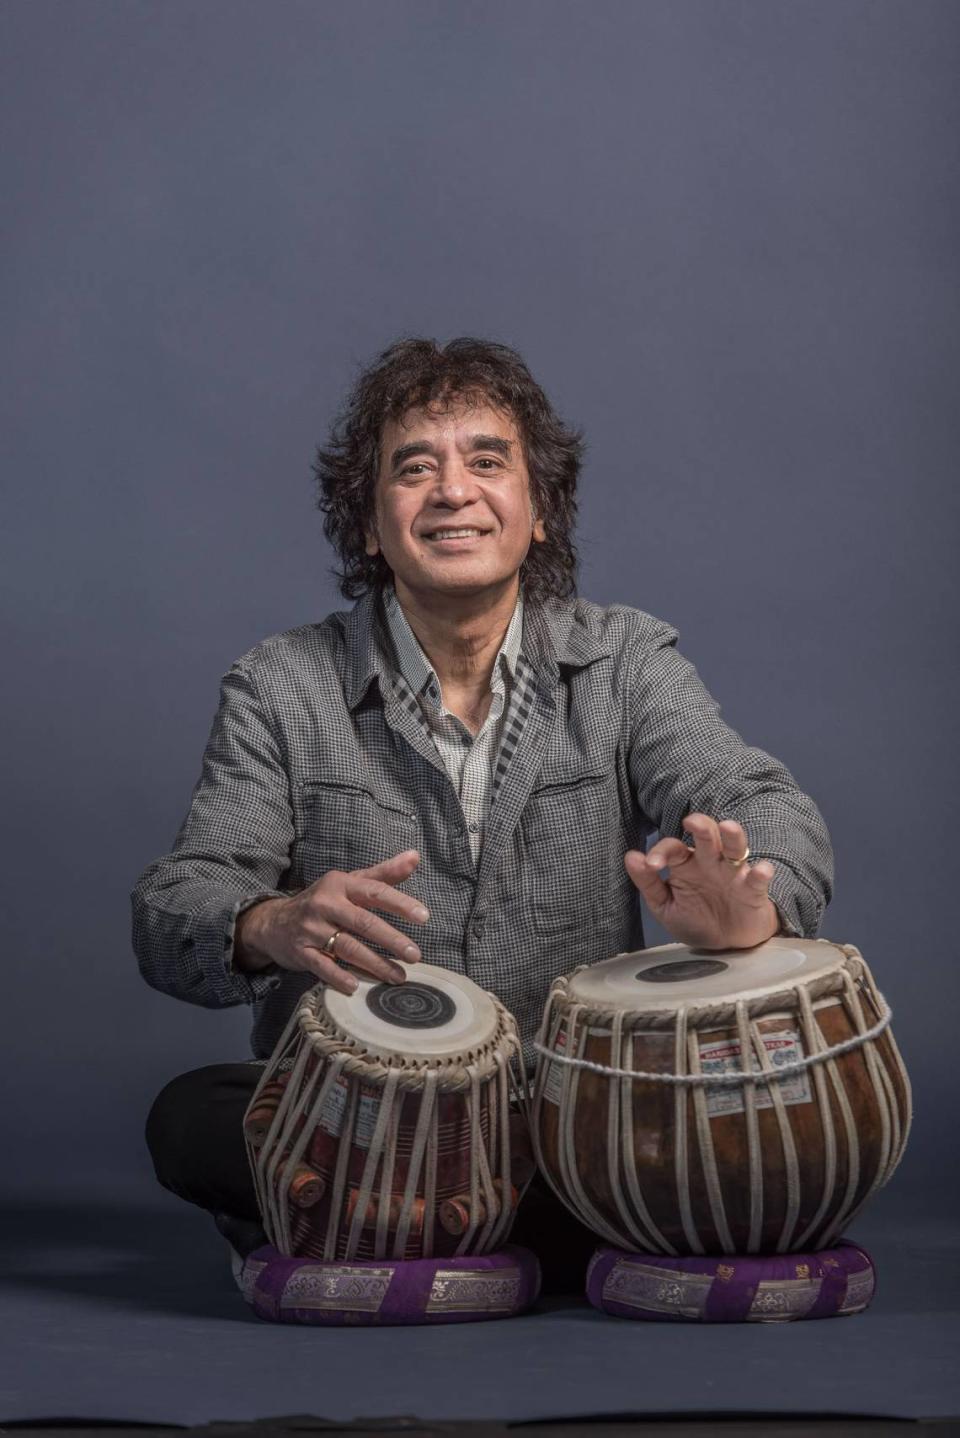 Celebrated Indian musician Zakir Hussain will perform with the Masters of Percussion on April 1.